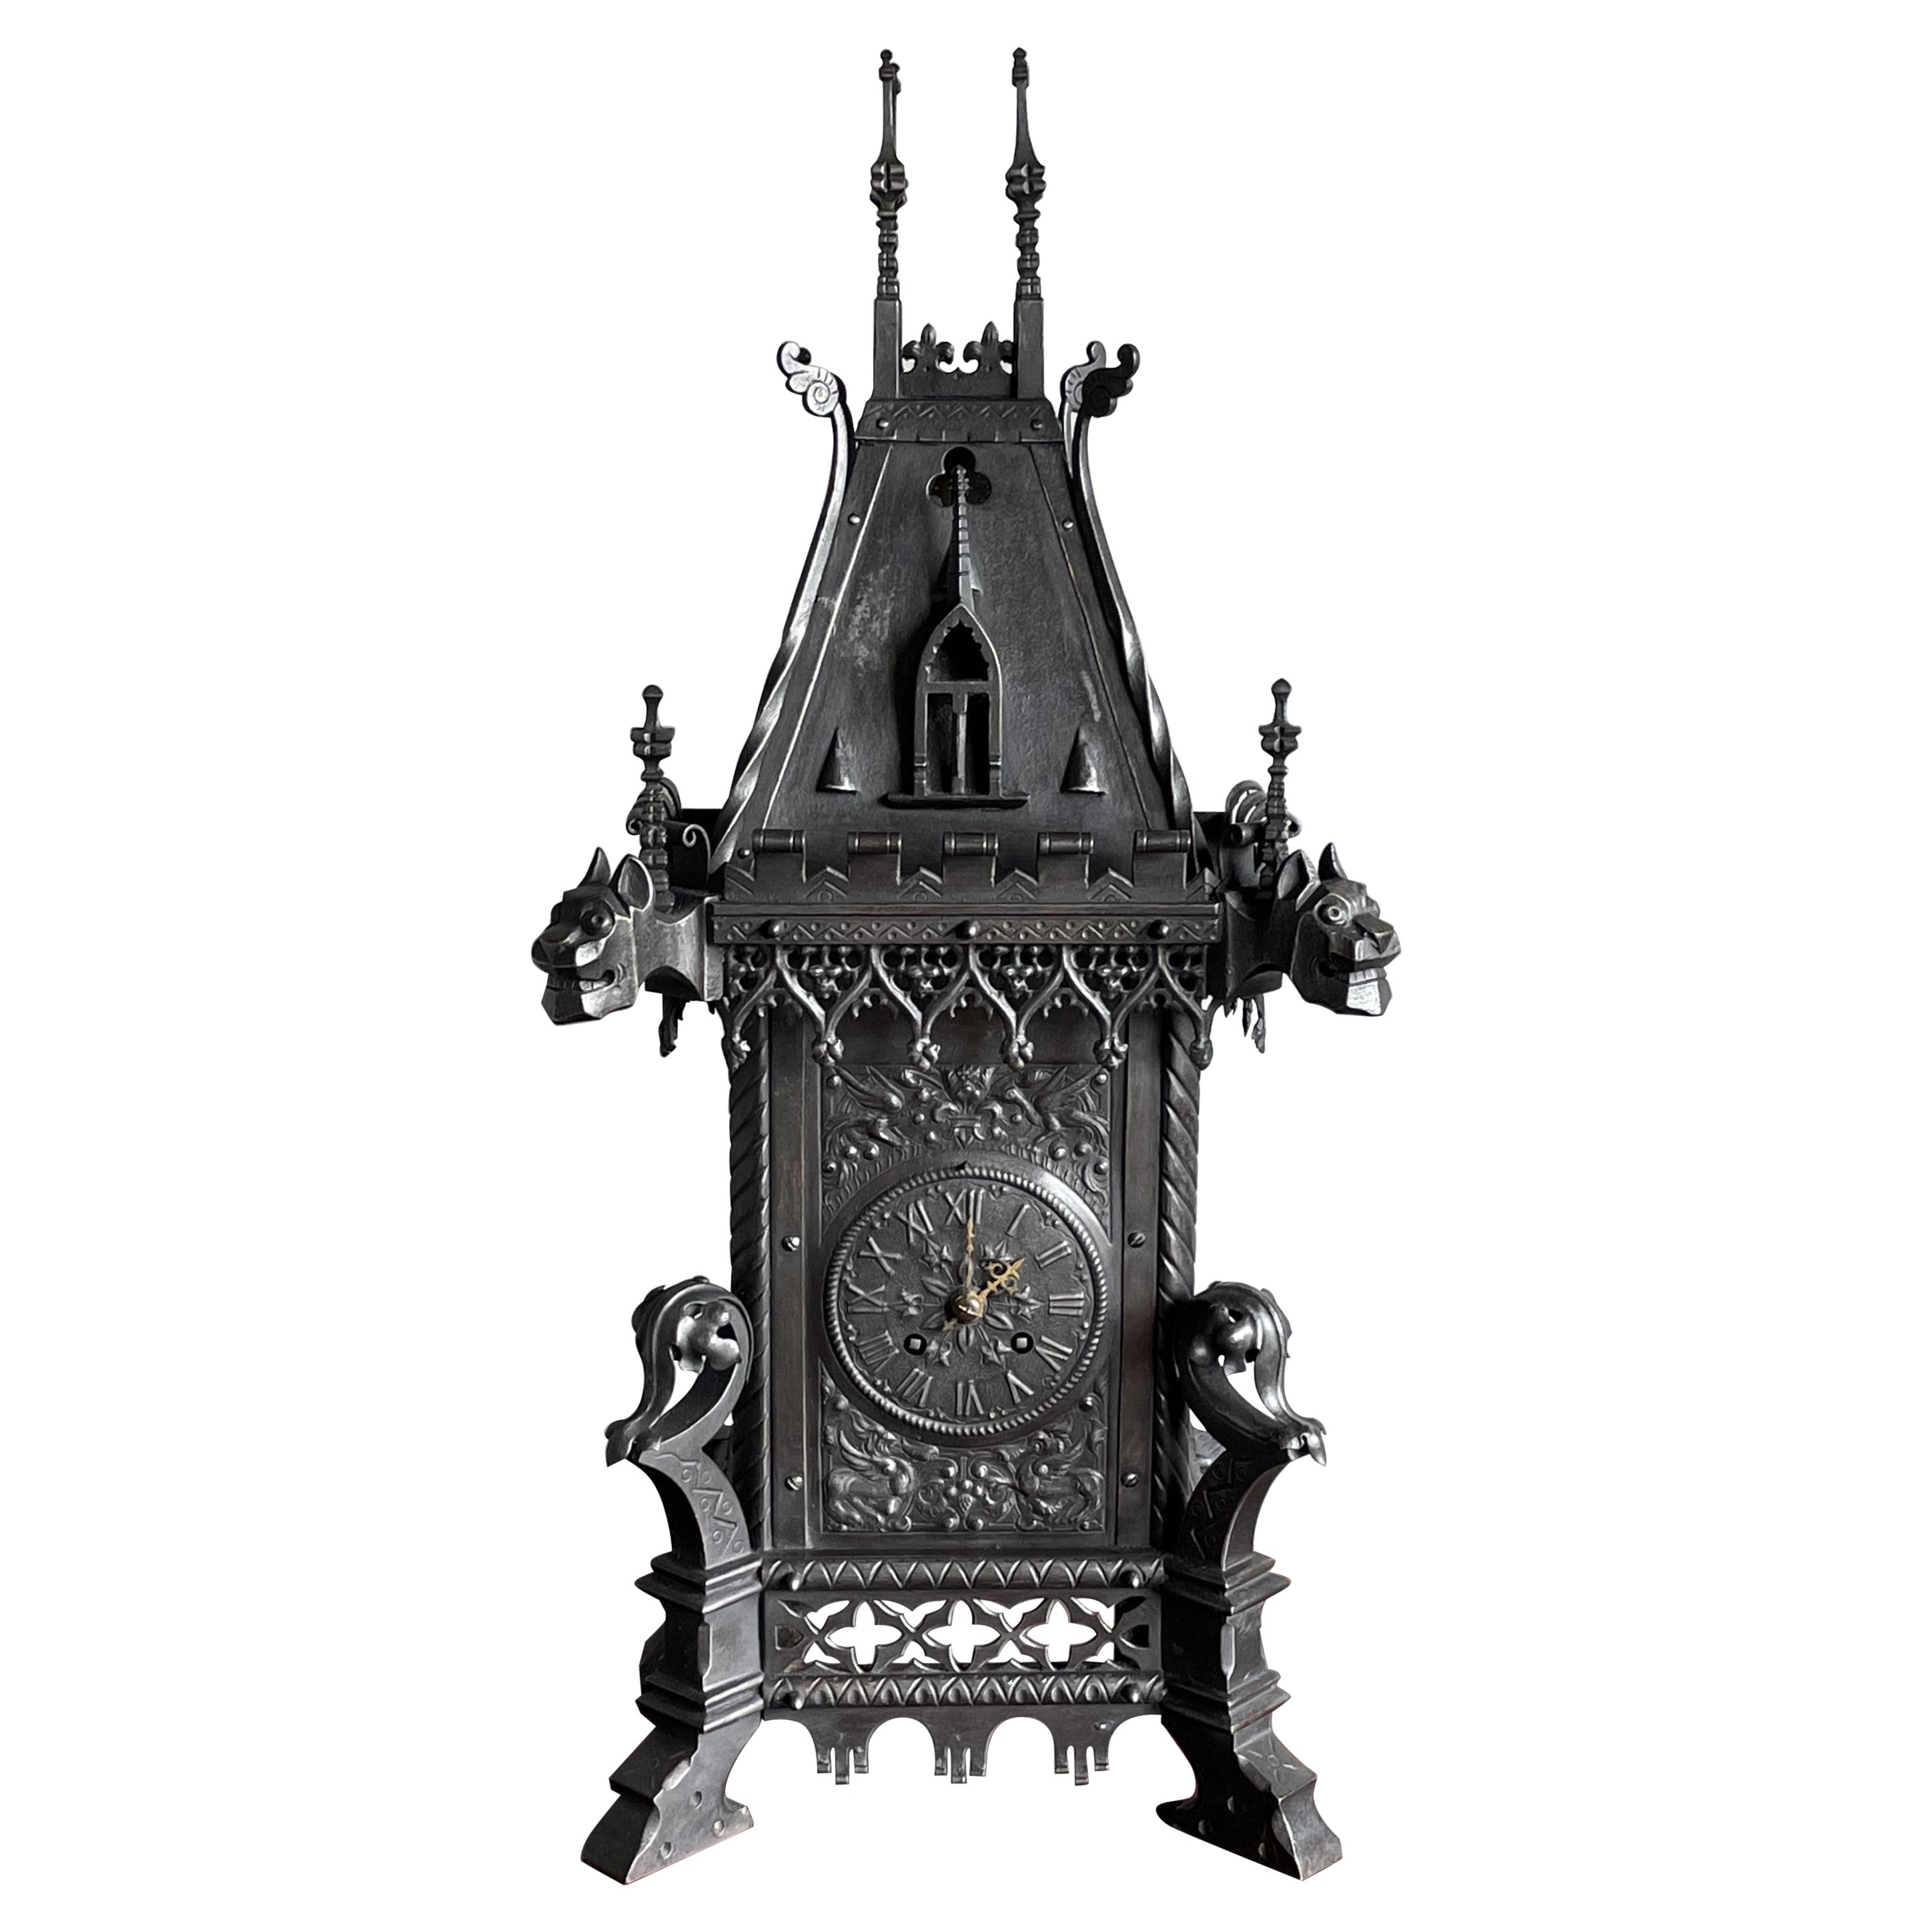 Antique Gothic Revival Forged Wrought & Cast Iron Table Clock by Samuel Marti